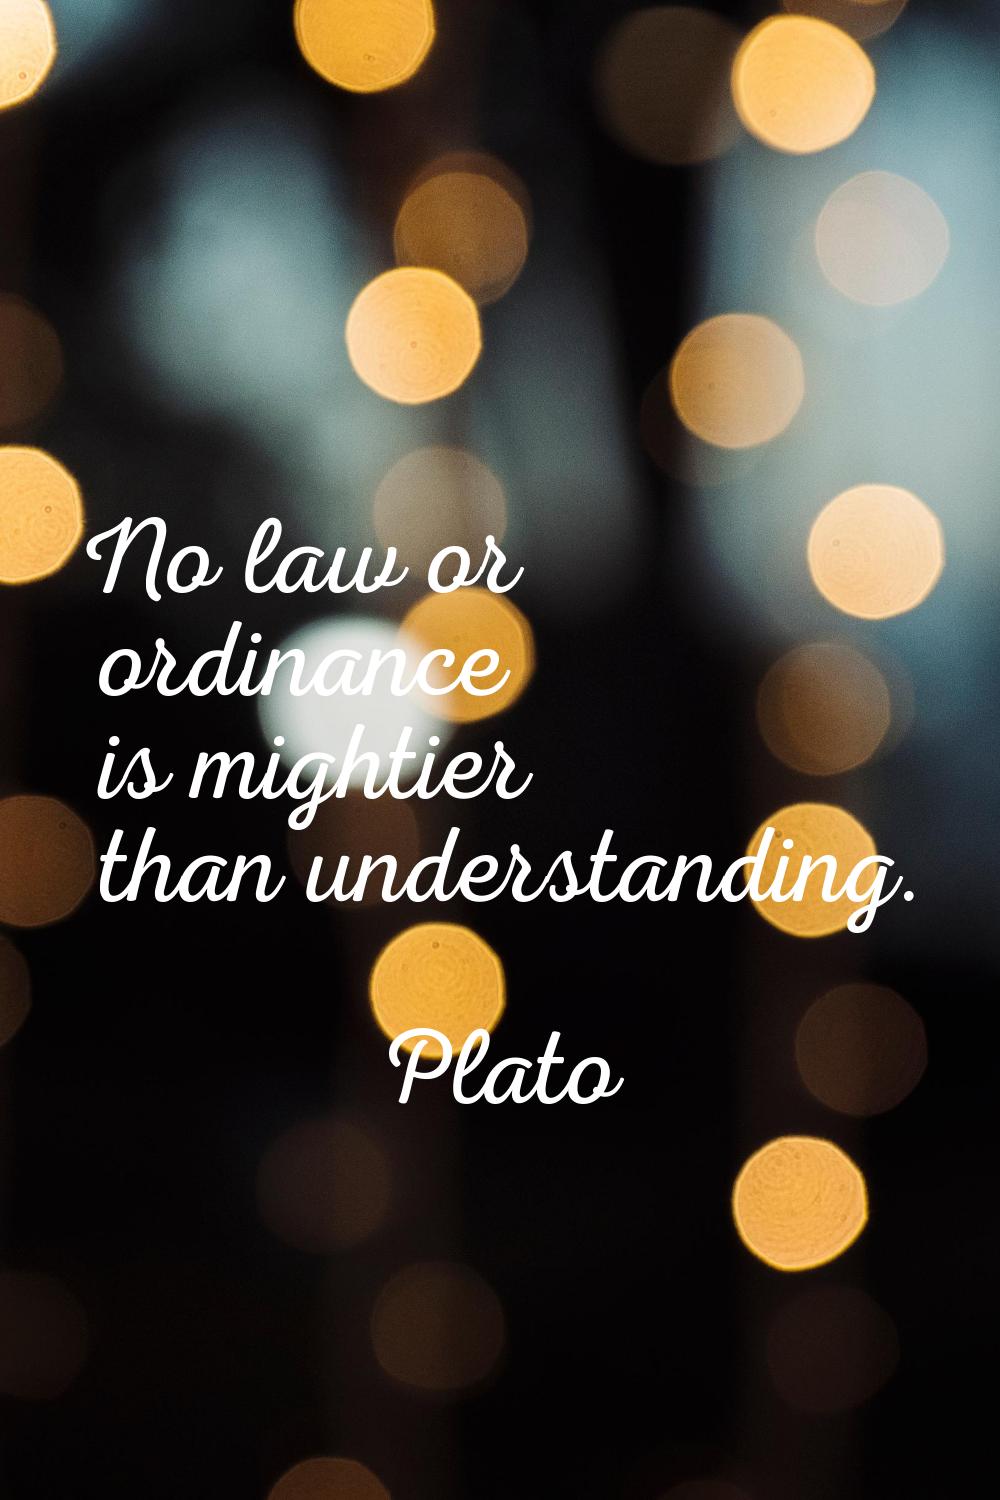 No law or ordinance is mightier than understanding.